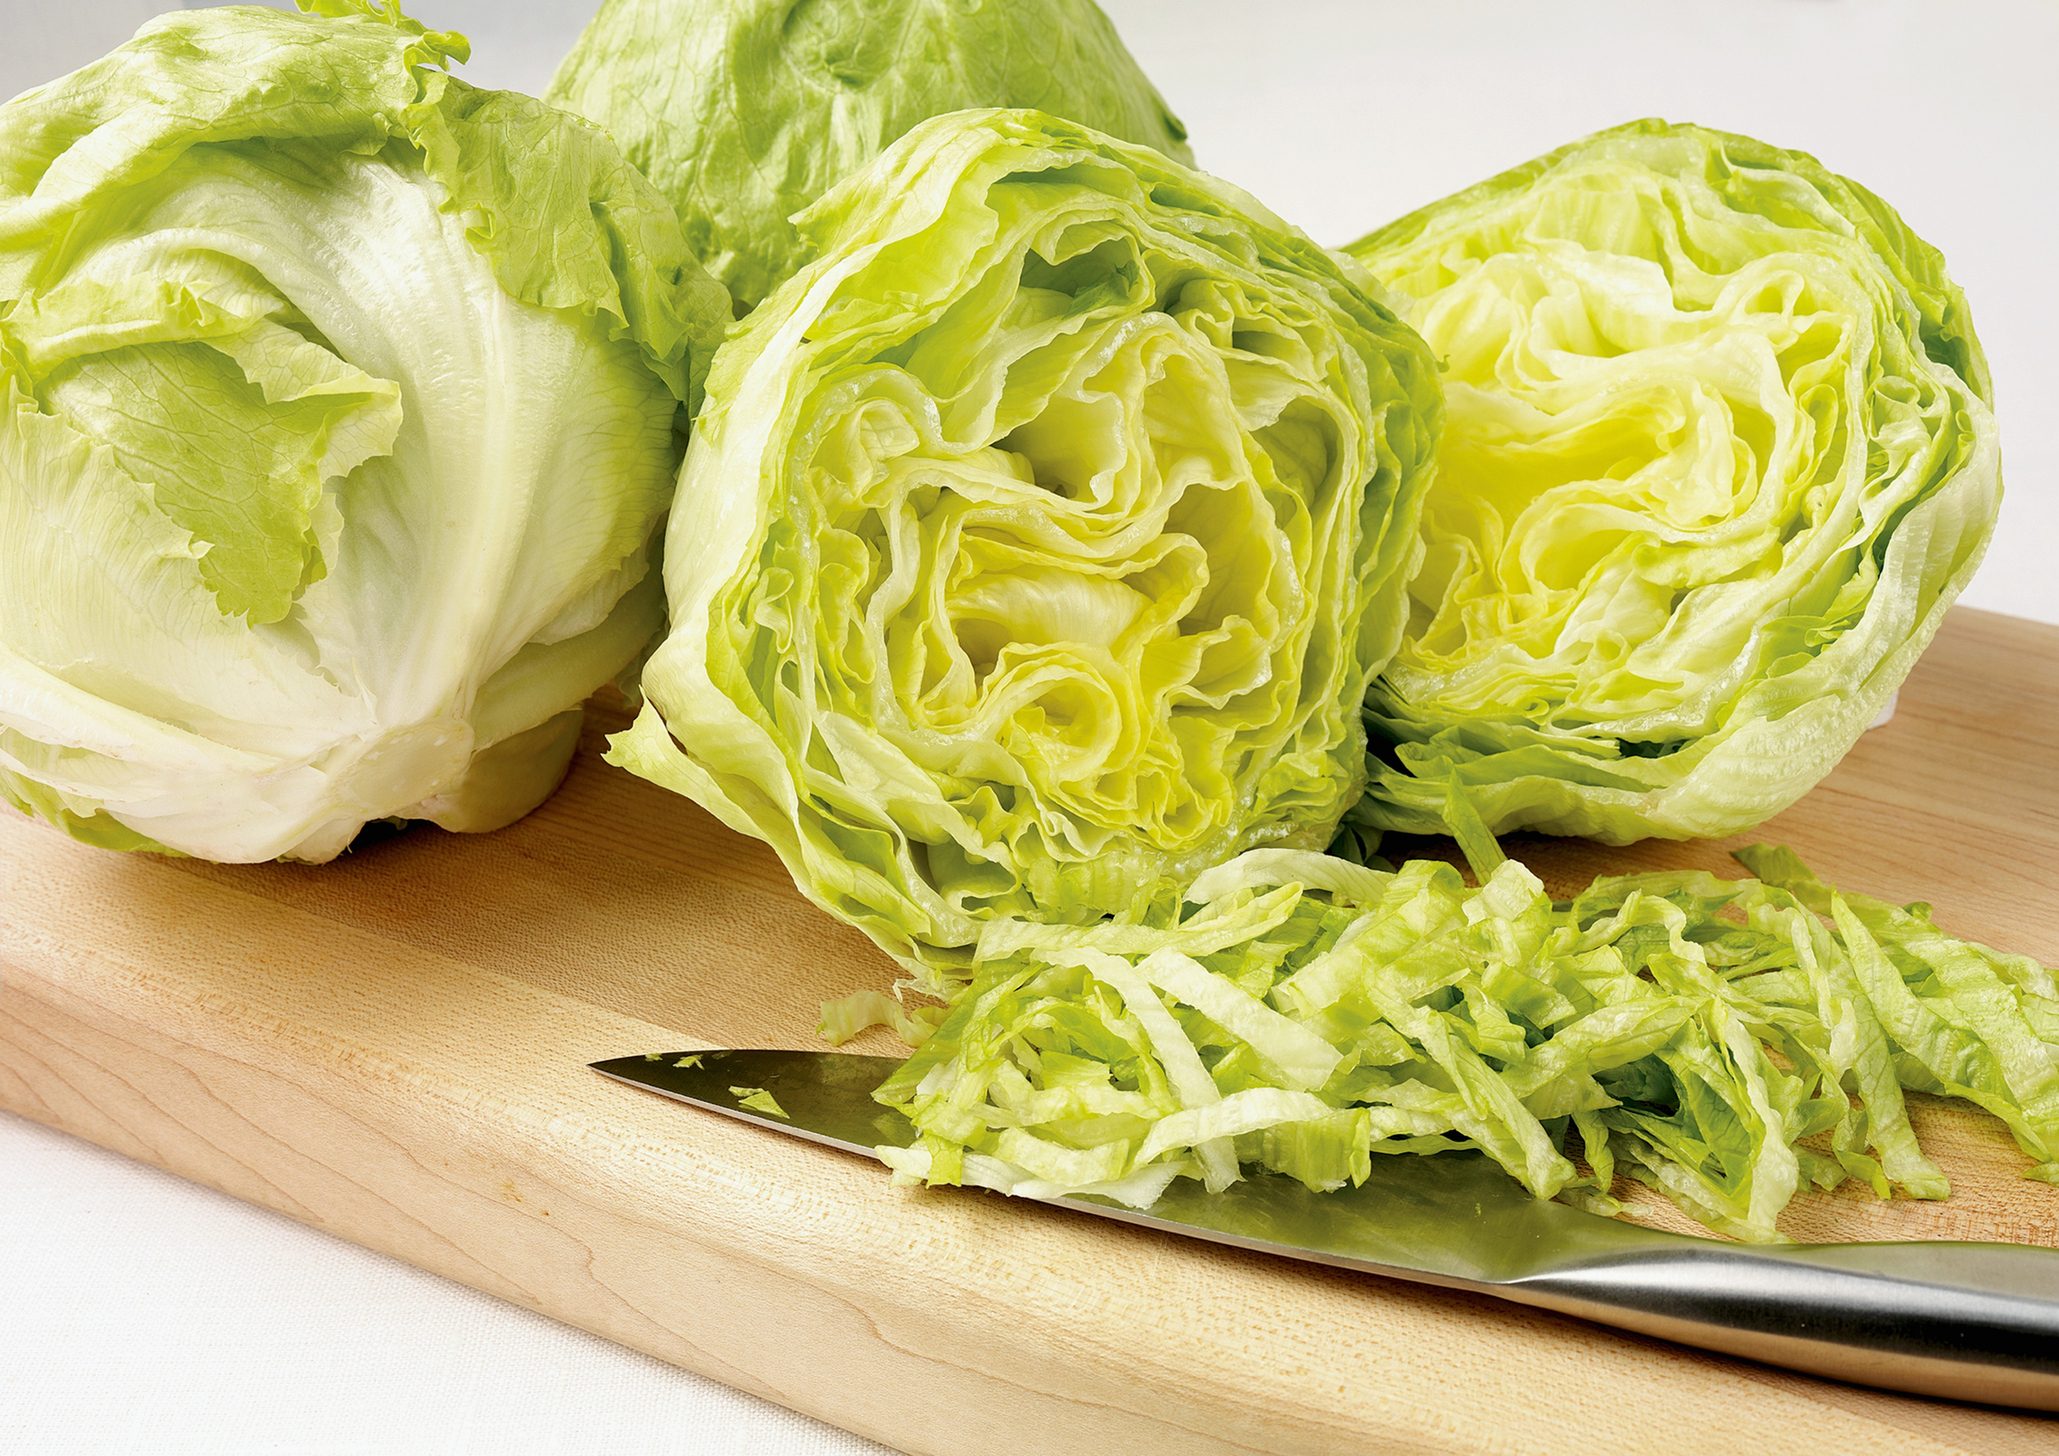 Head of iceberg lettuce cut in half on a board, with shredded pieces and a knife